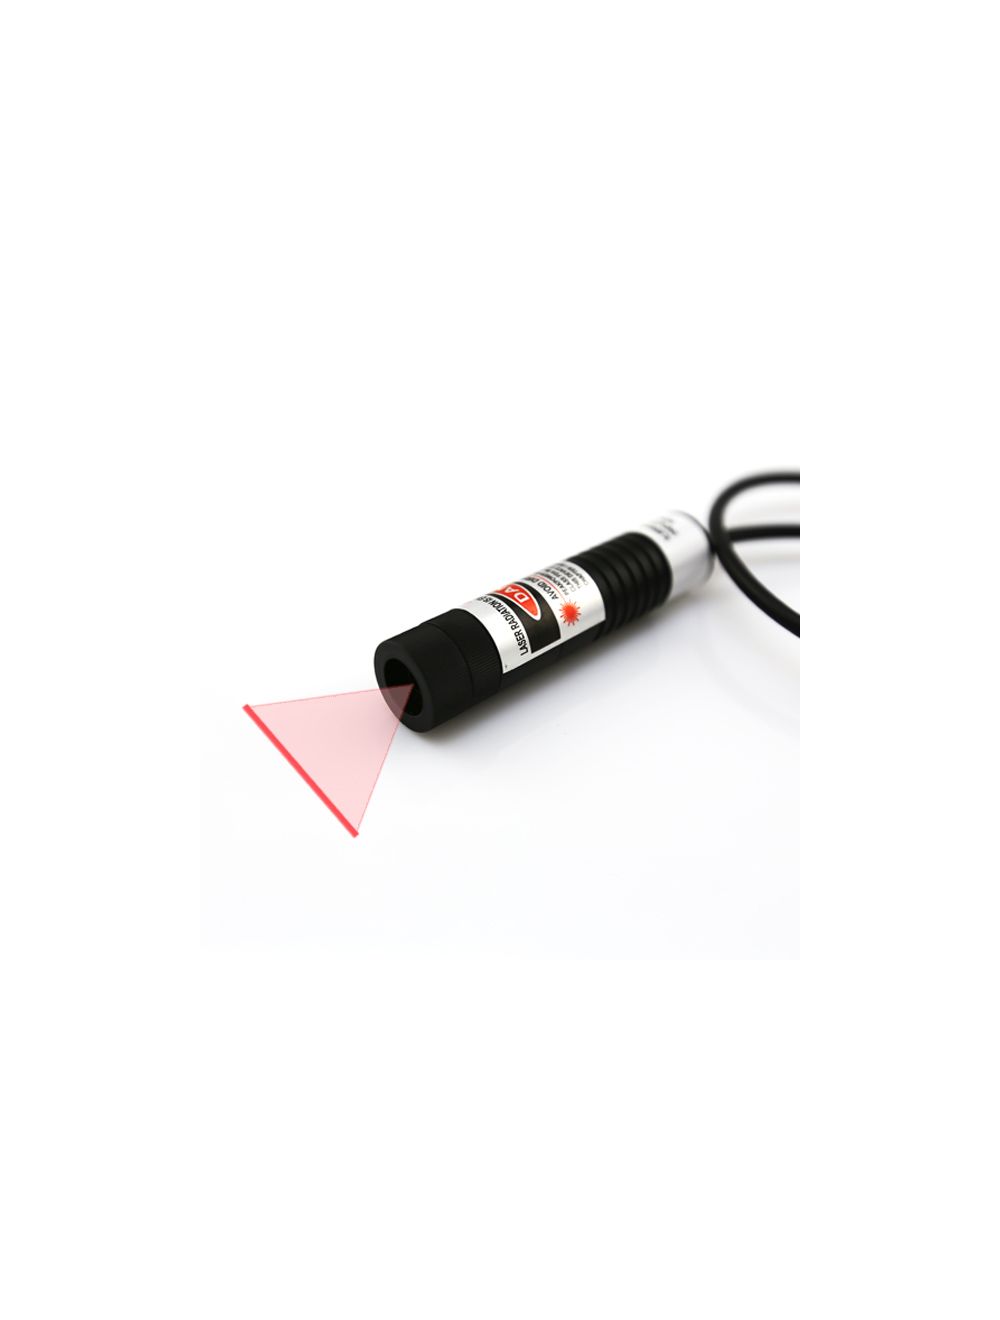 Line laser system bright red 20mw 635nm 